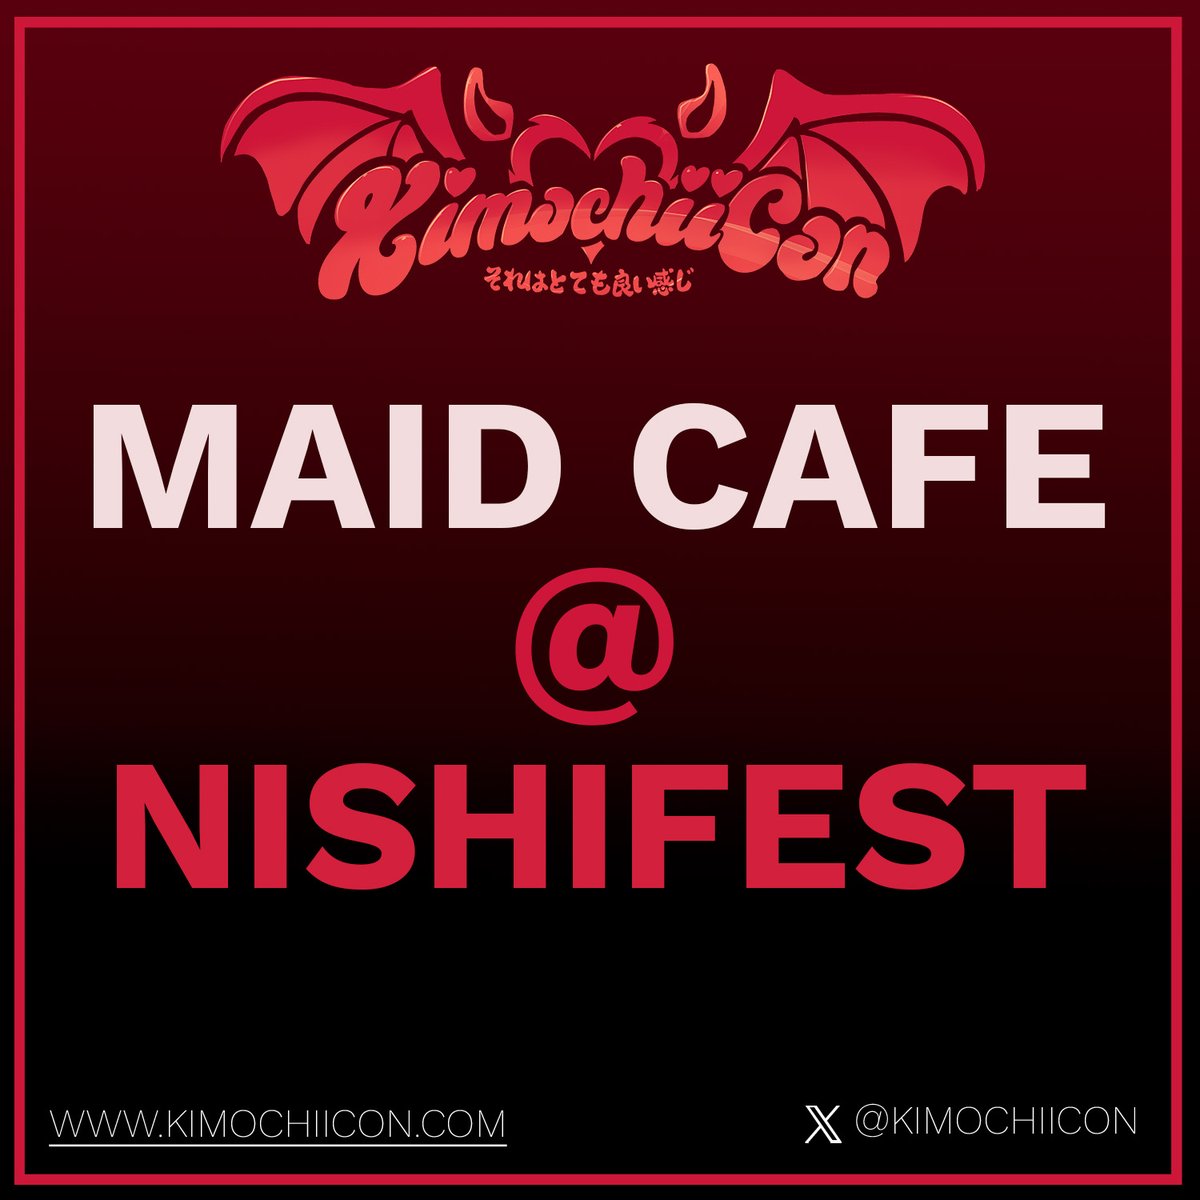 ❤️‍🔥 MAID CAFE AT NISHIFEST ❤️‍🔥 Saddle up and moo-sey on down for our cow-themed maid cafe being hosted at @nishifest! 🐮💖 We hope to see you there!